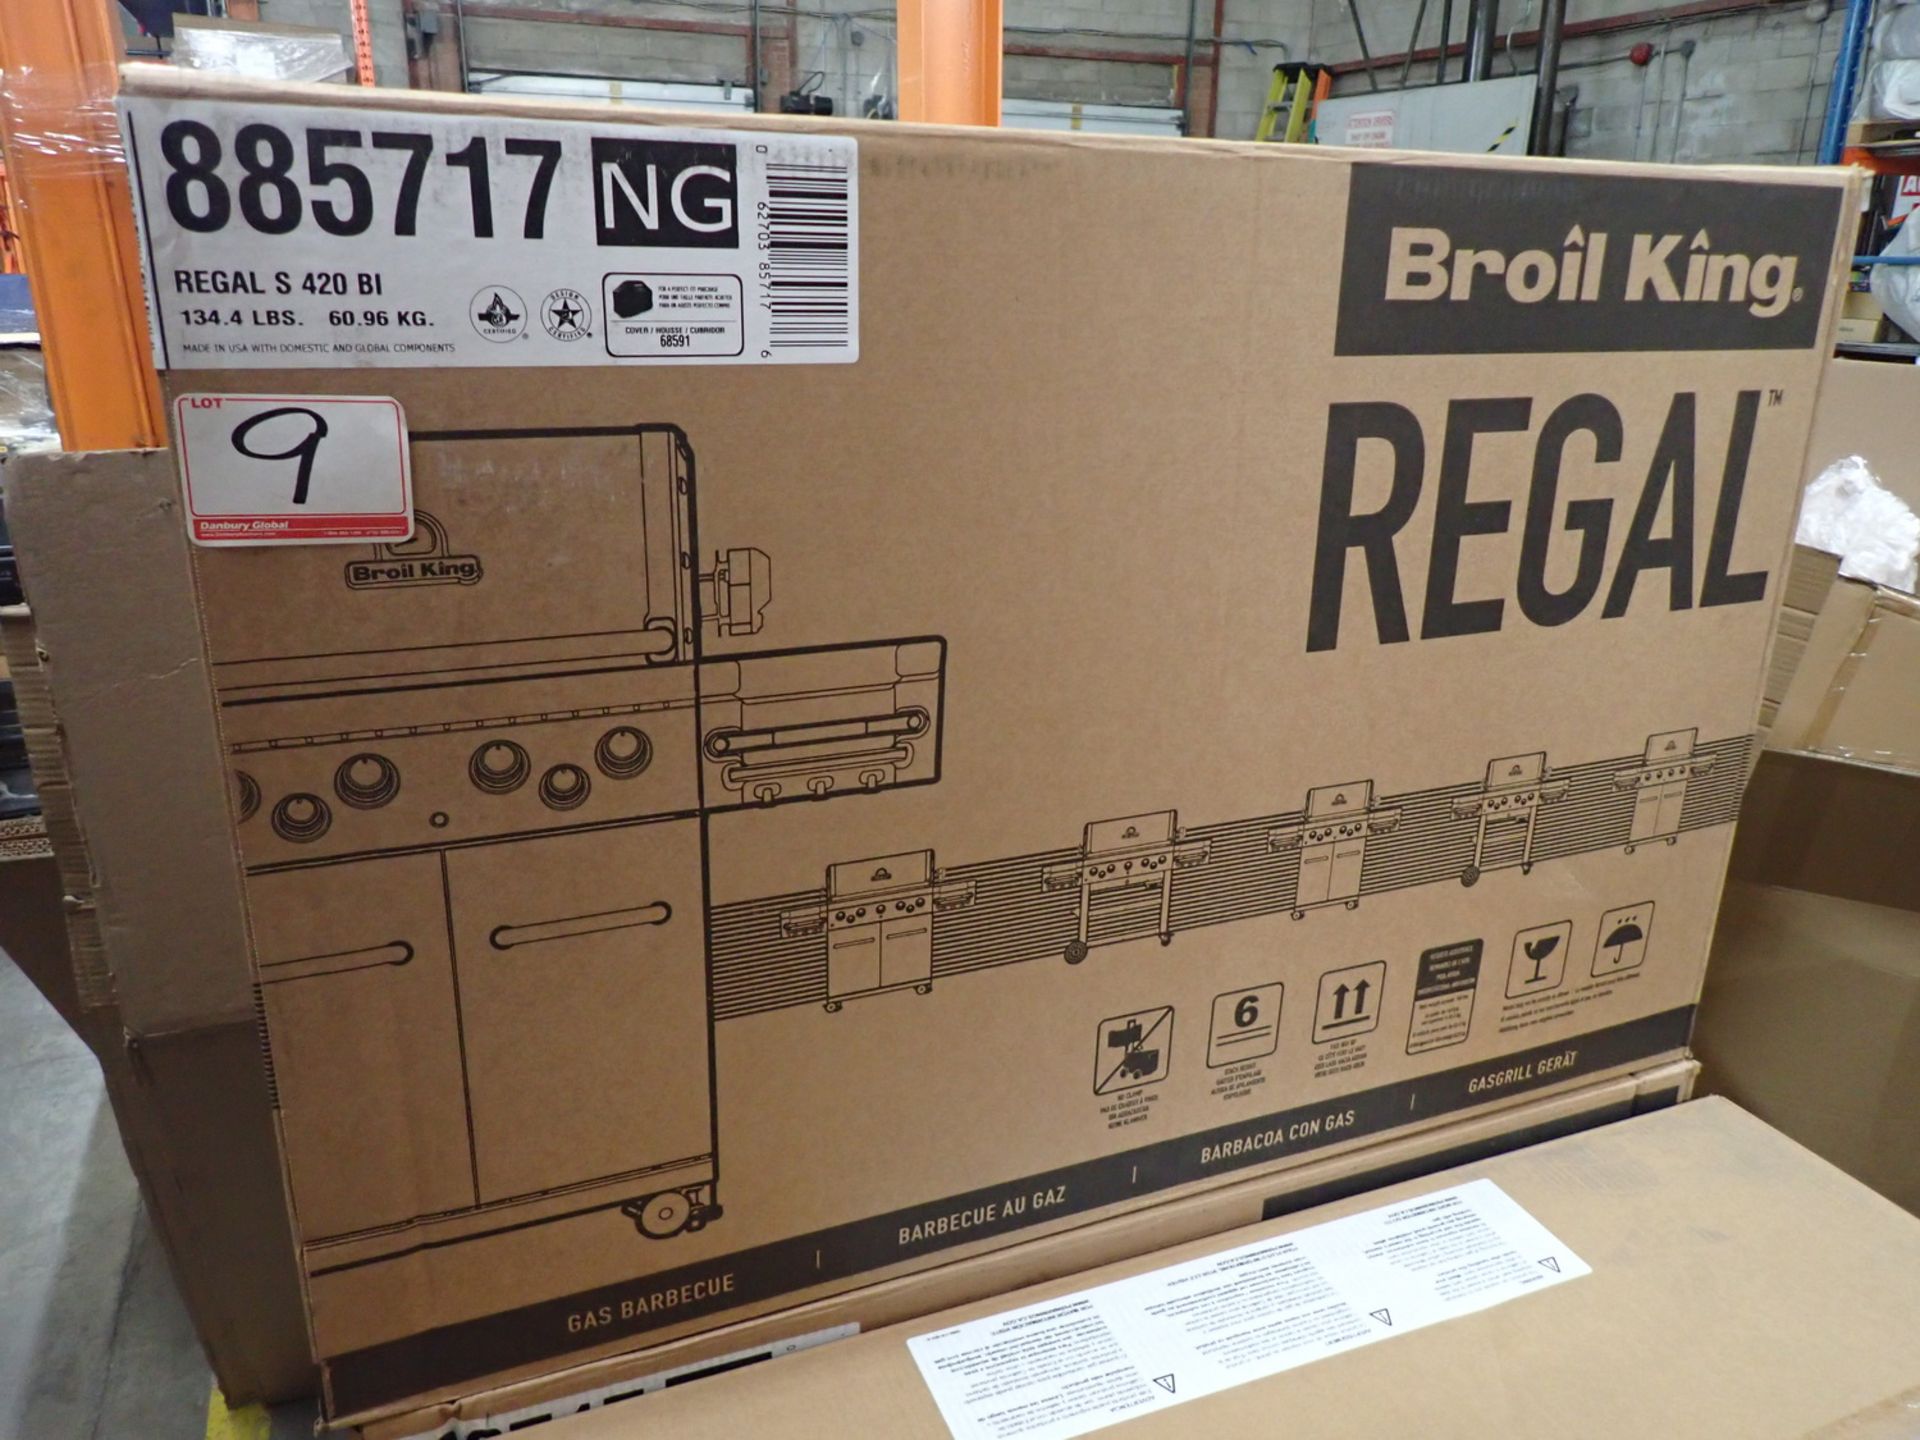 BROIL KING REGAL S-420 BUILT-IN 4-BURNER NATURAL GAS BBQ W/ STAINLESS STEEL GRID (NEW IN BOX) (